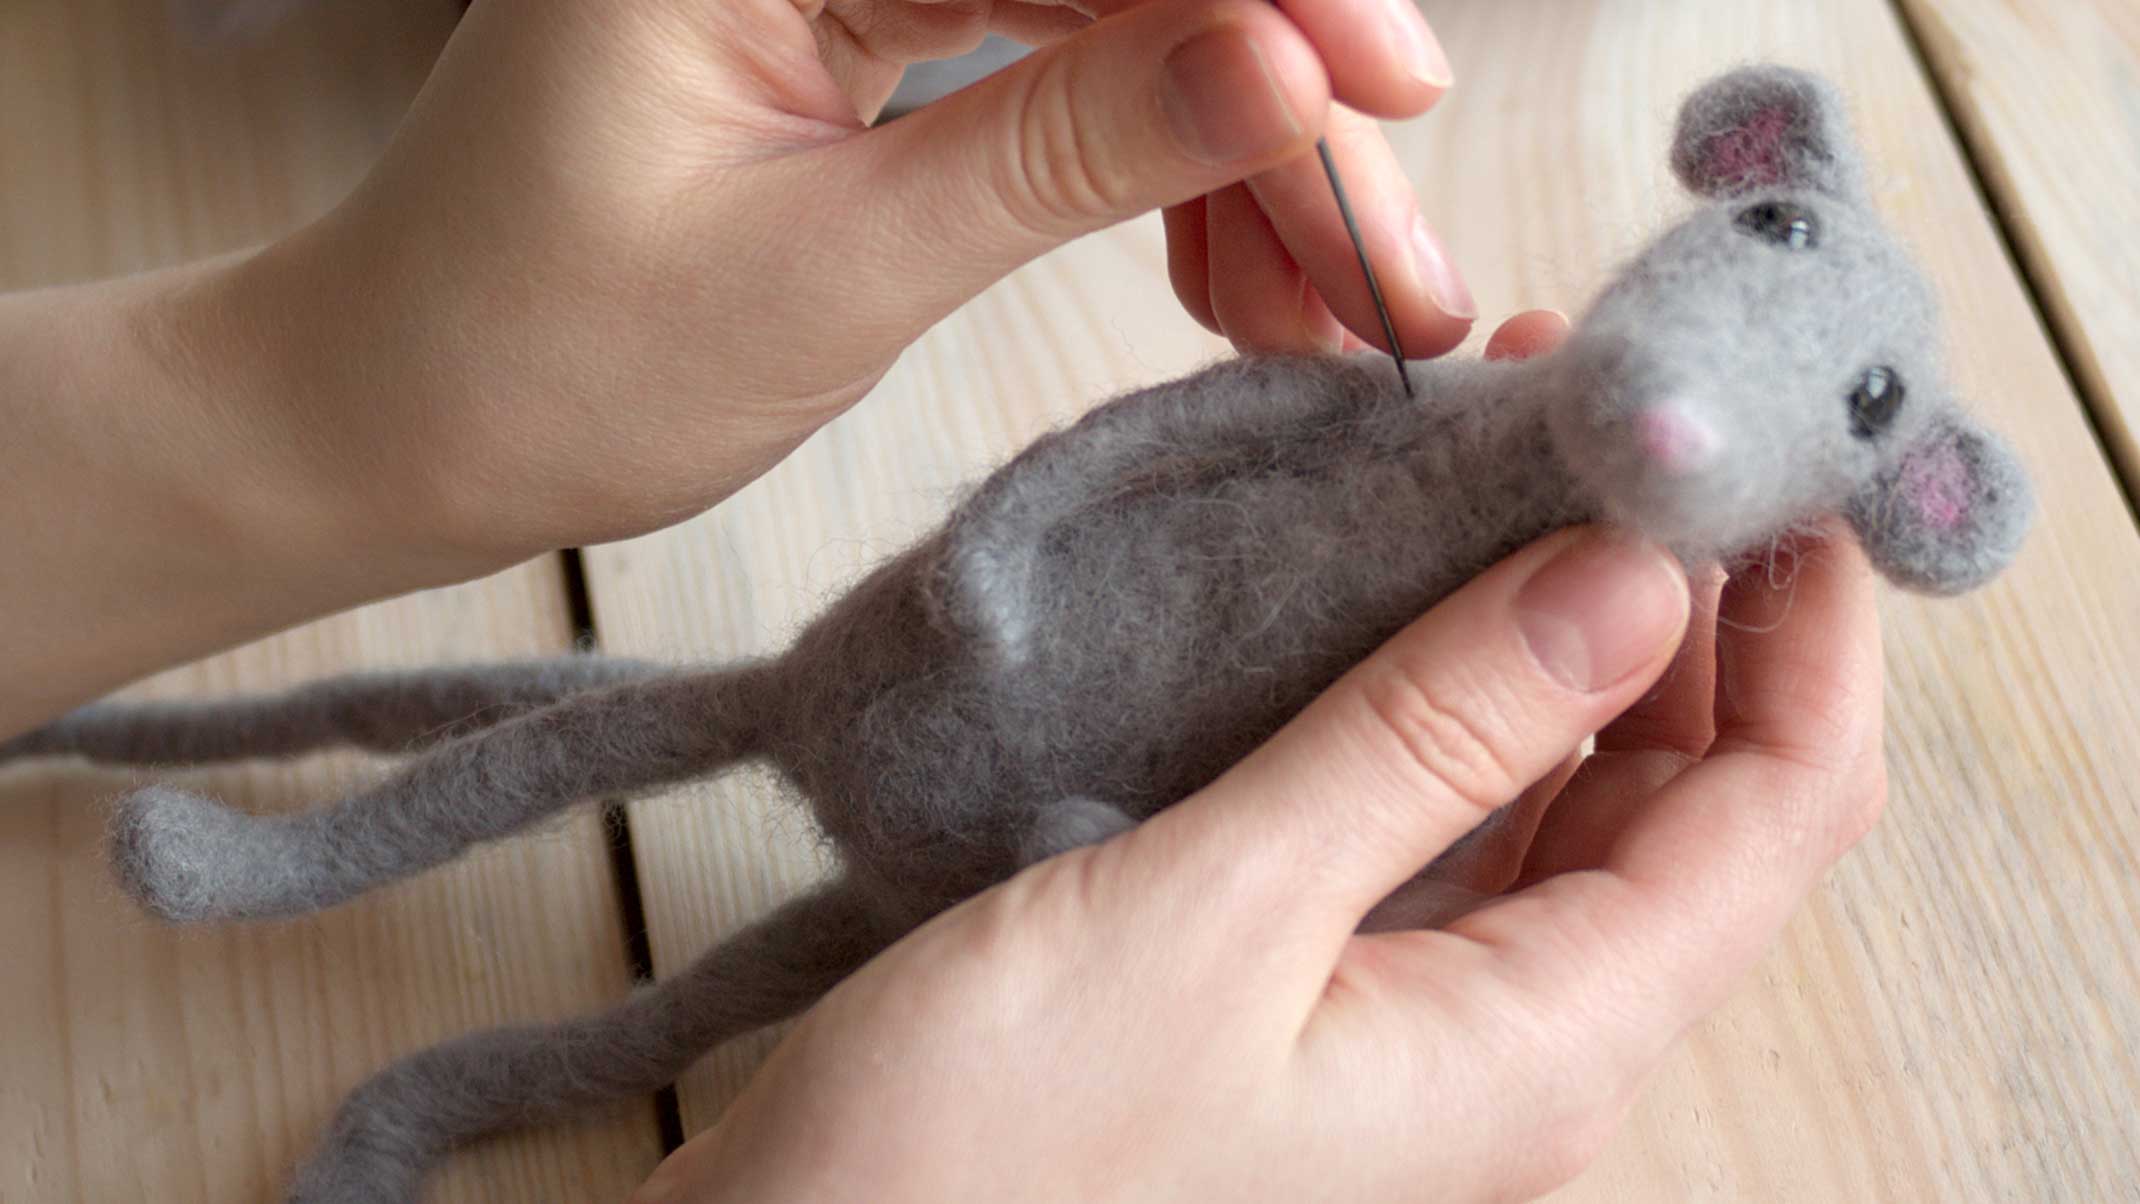 Pet hair crafts: cool or gross?